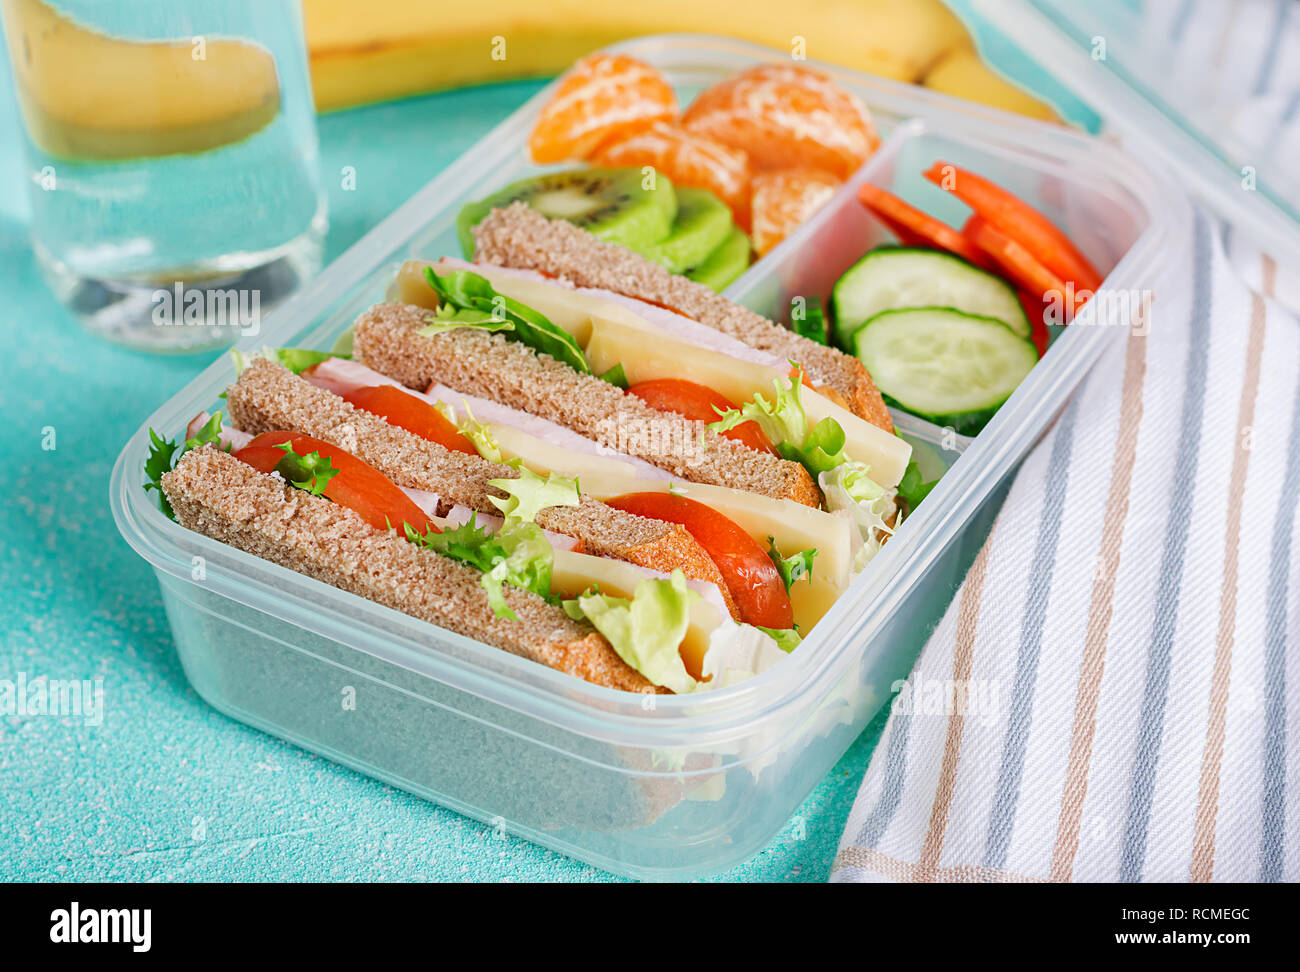 https://c8.alamy.com/comp/RCMEGC/school-lunch-box-with-sandwich-vegetables-water-and-fruits-on-table-healthy-eating-habits-concept-RCMEGC.jpg